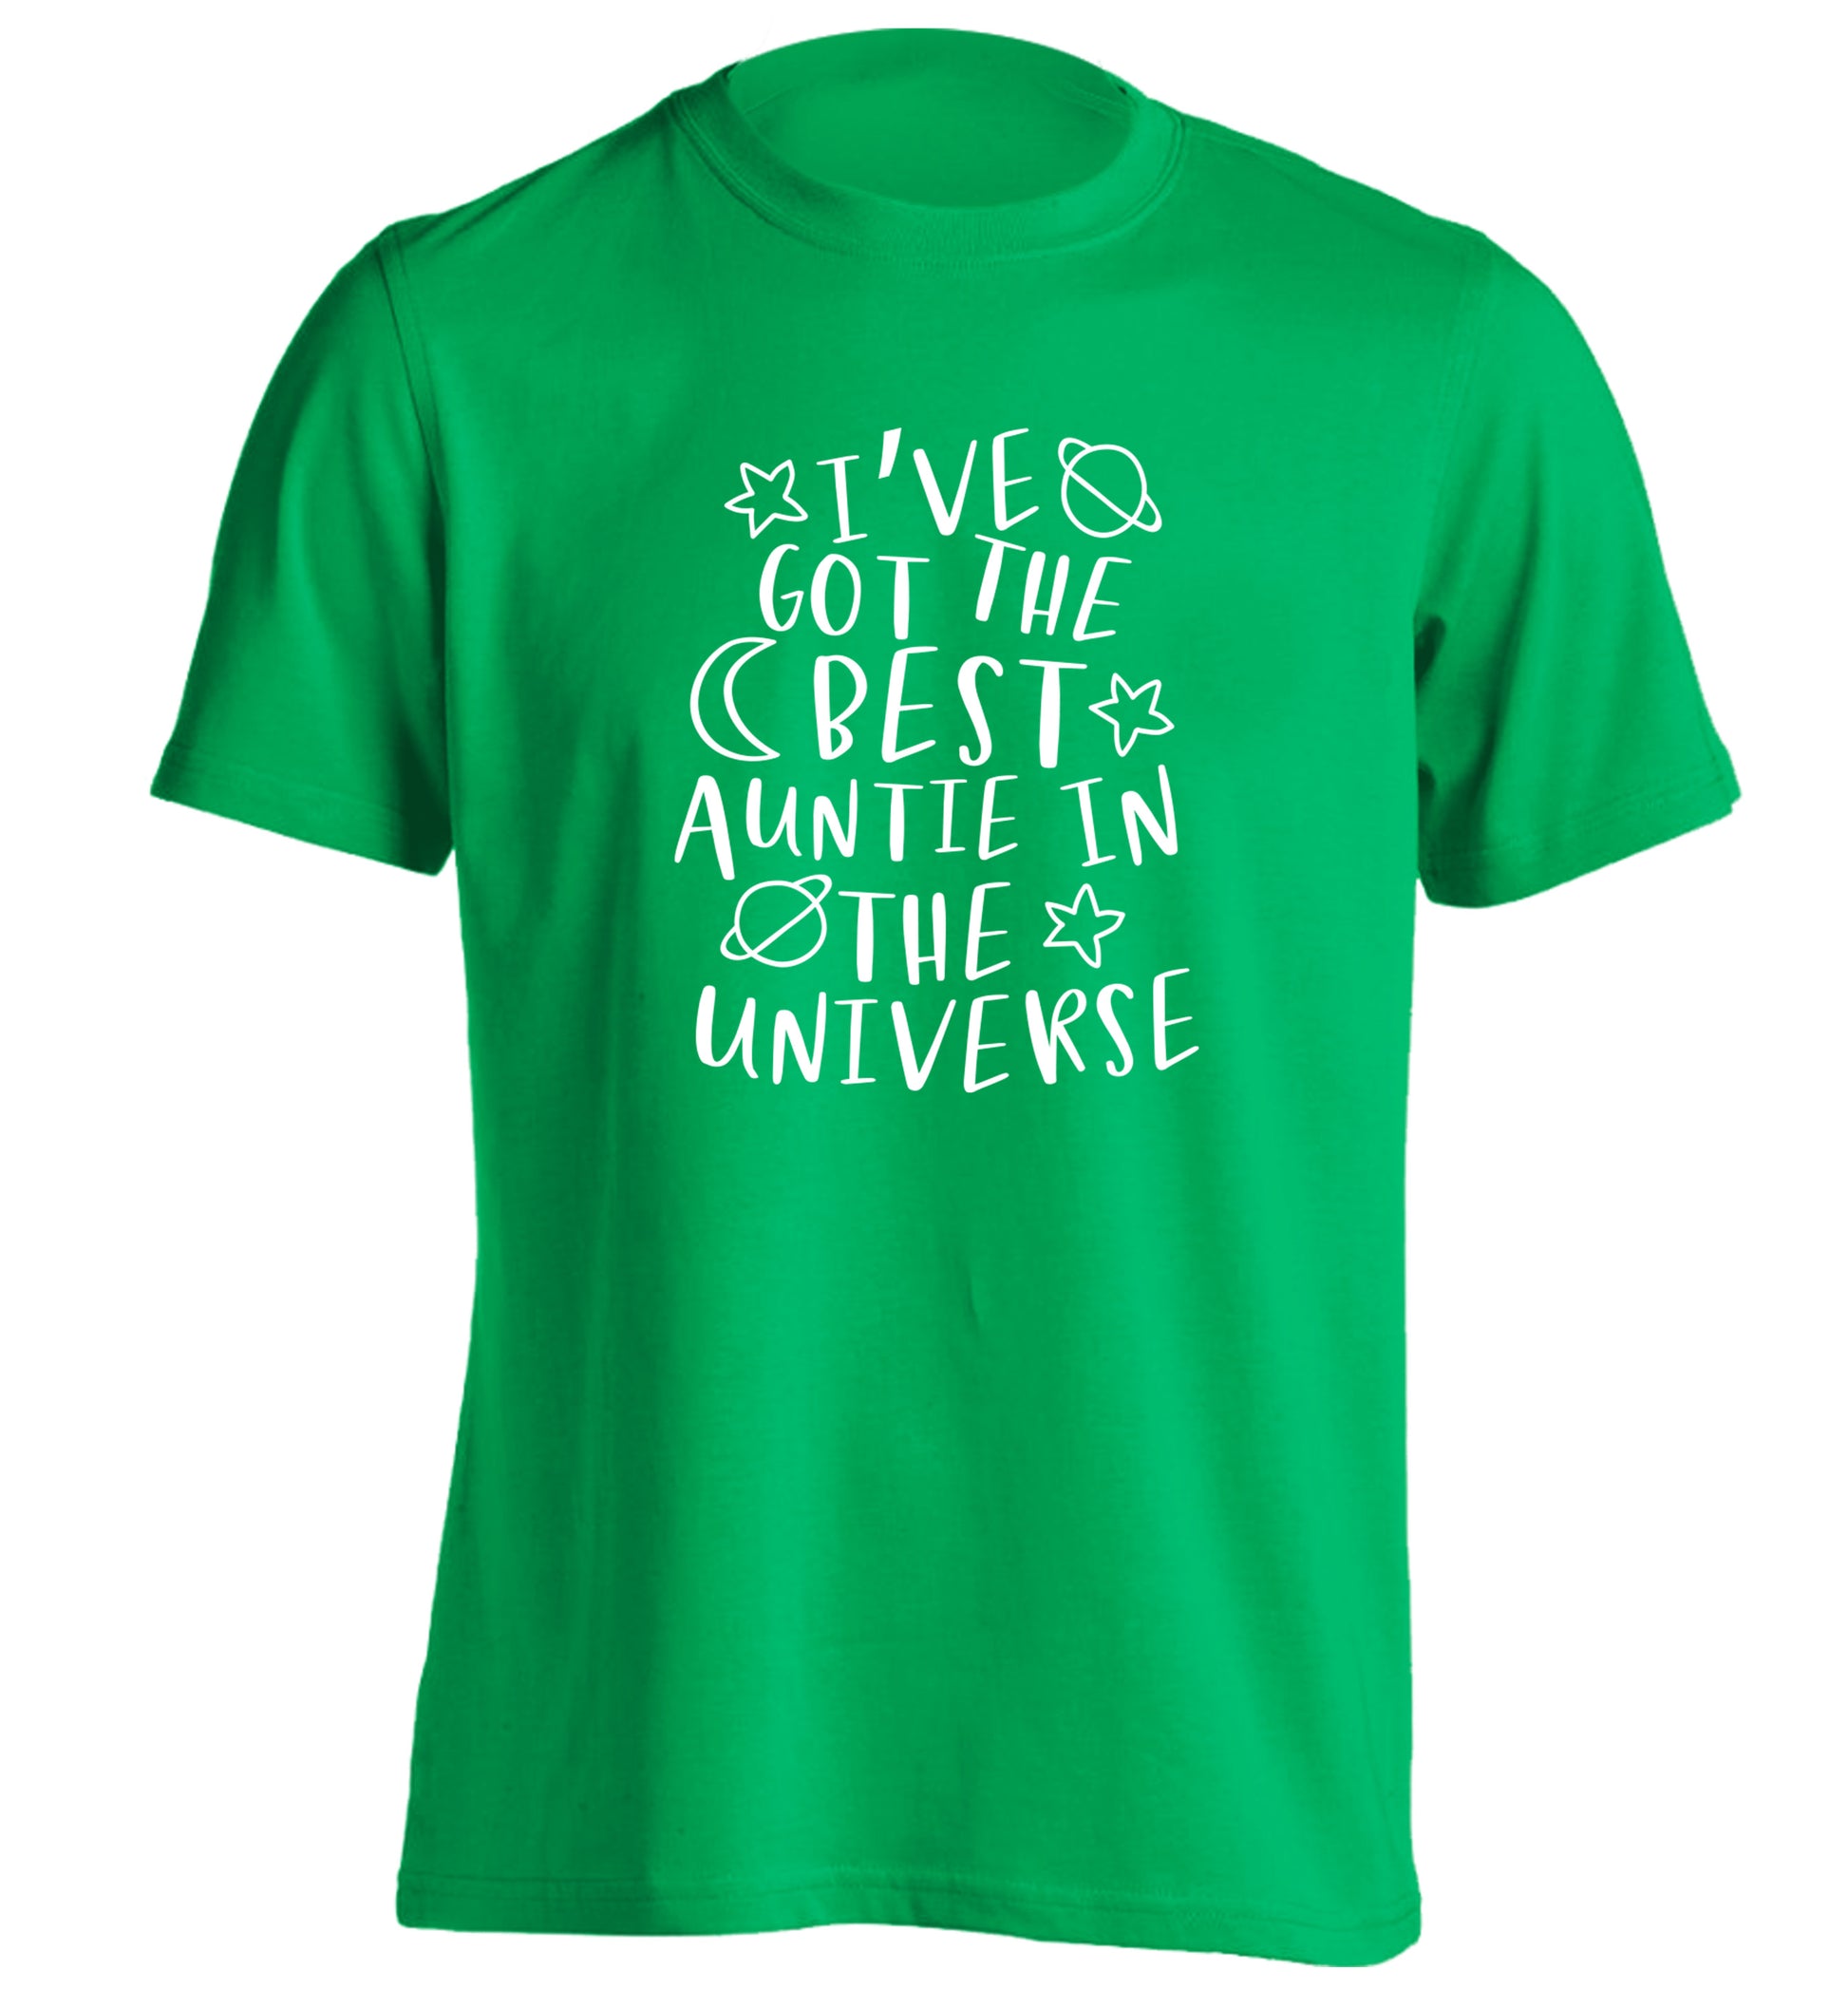 I've got the best auntie in the universe adults unisex green Tshirt 2XL